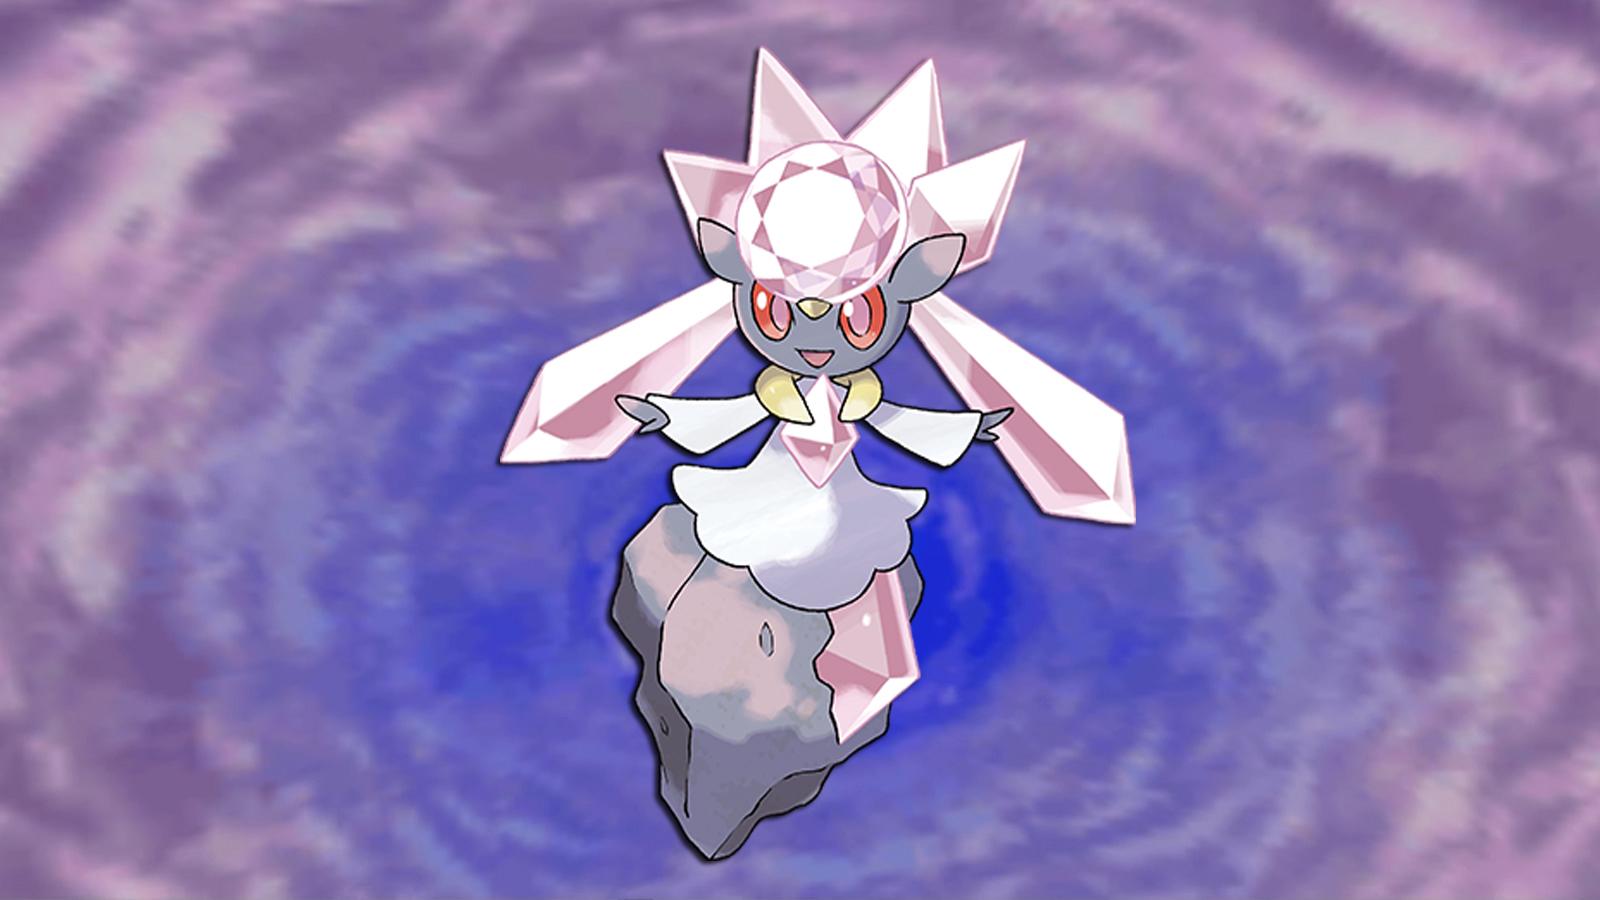 Pokemon Go is testing player patience with Diancie cutscene